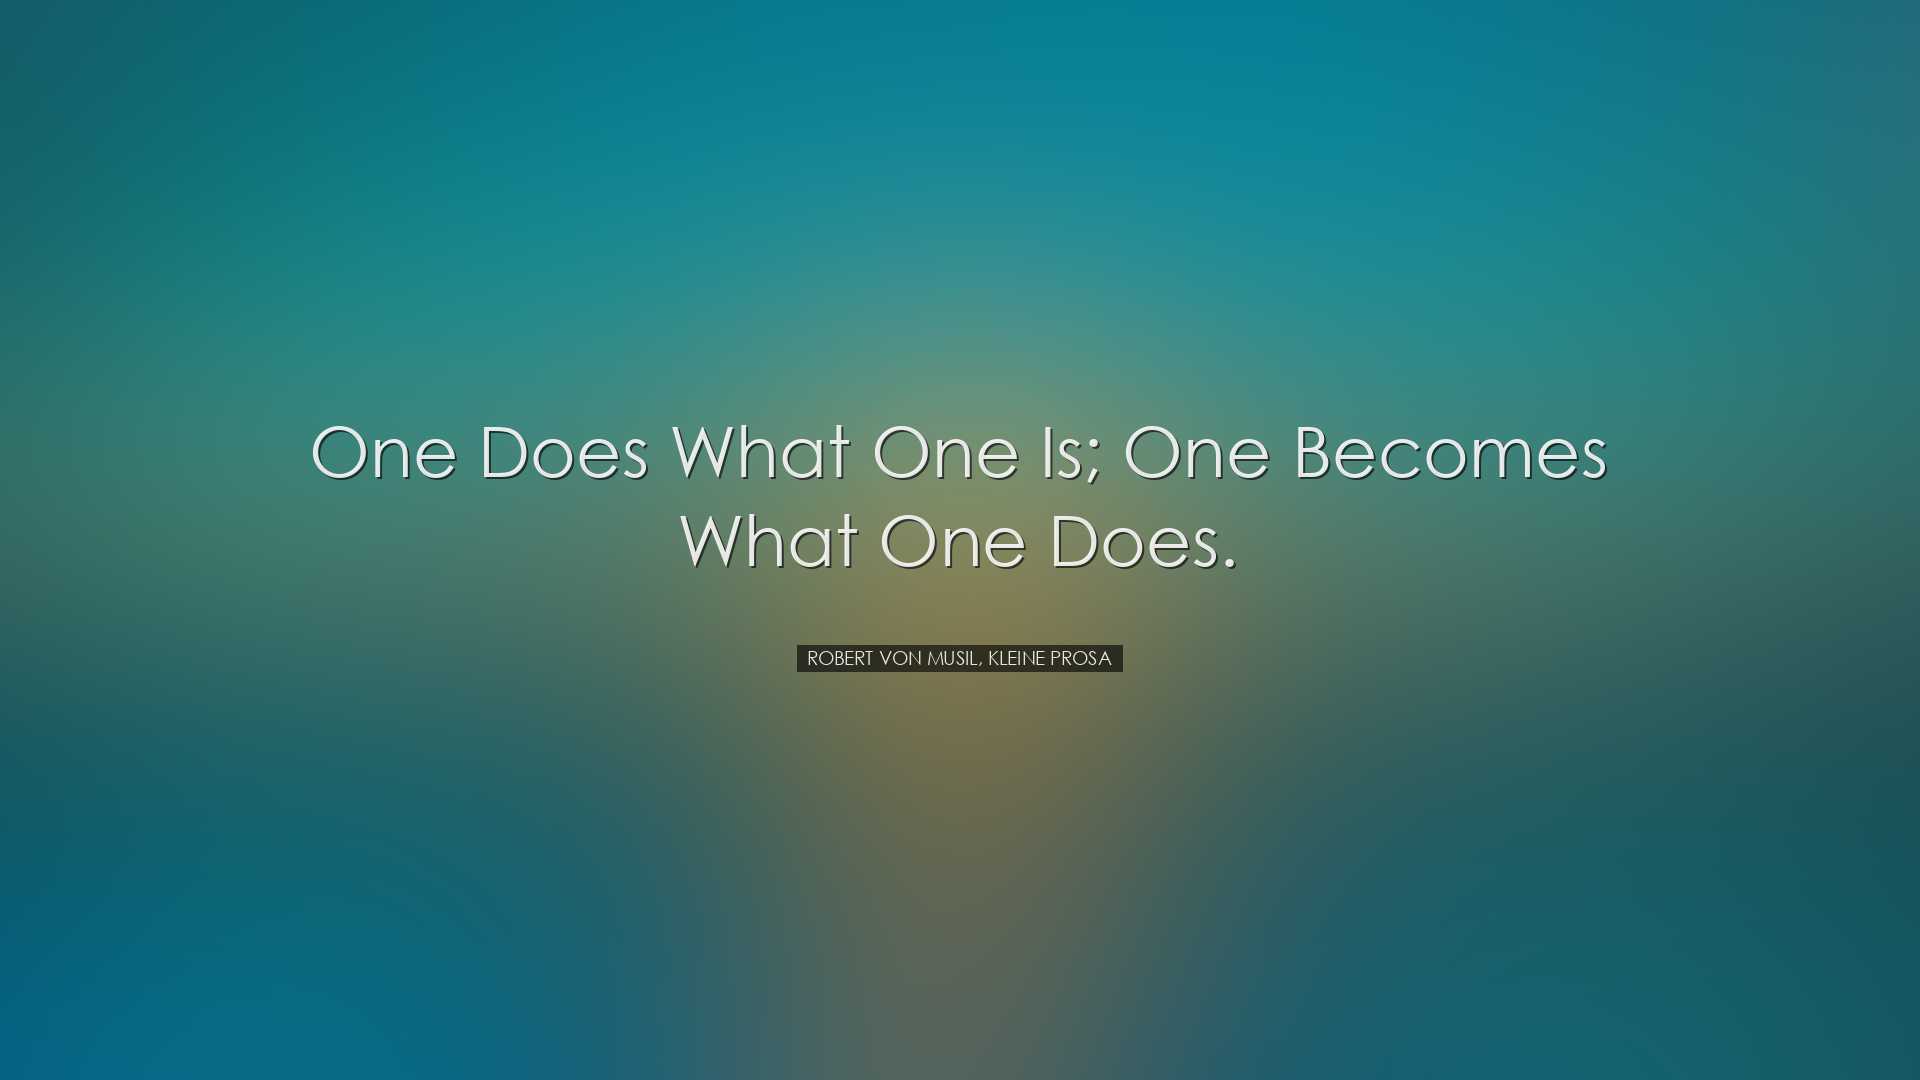 One does what one is; one becomes what one does. - Robert von Musi